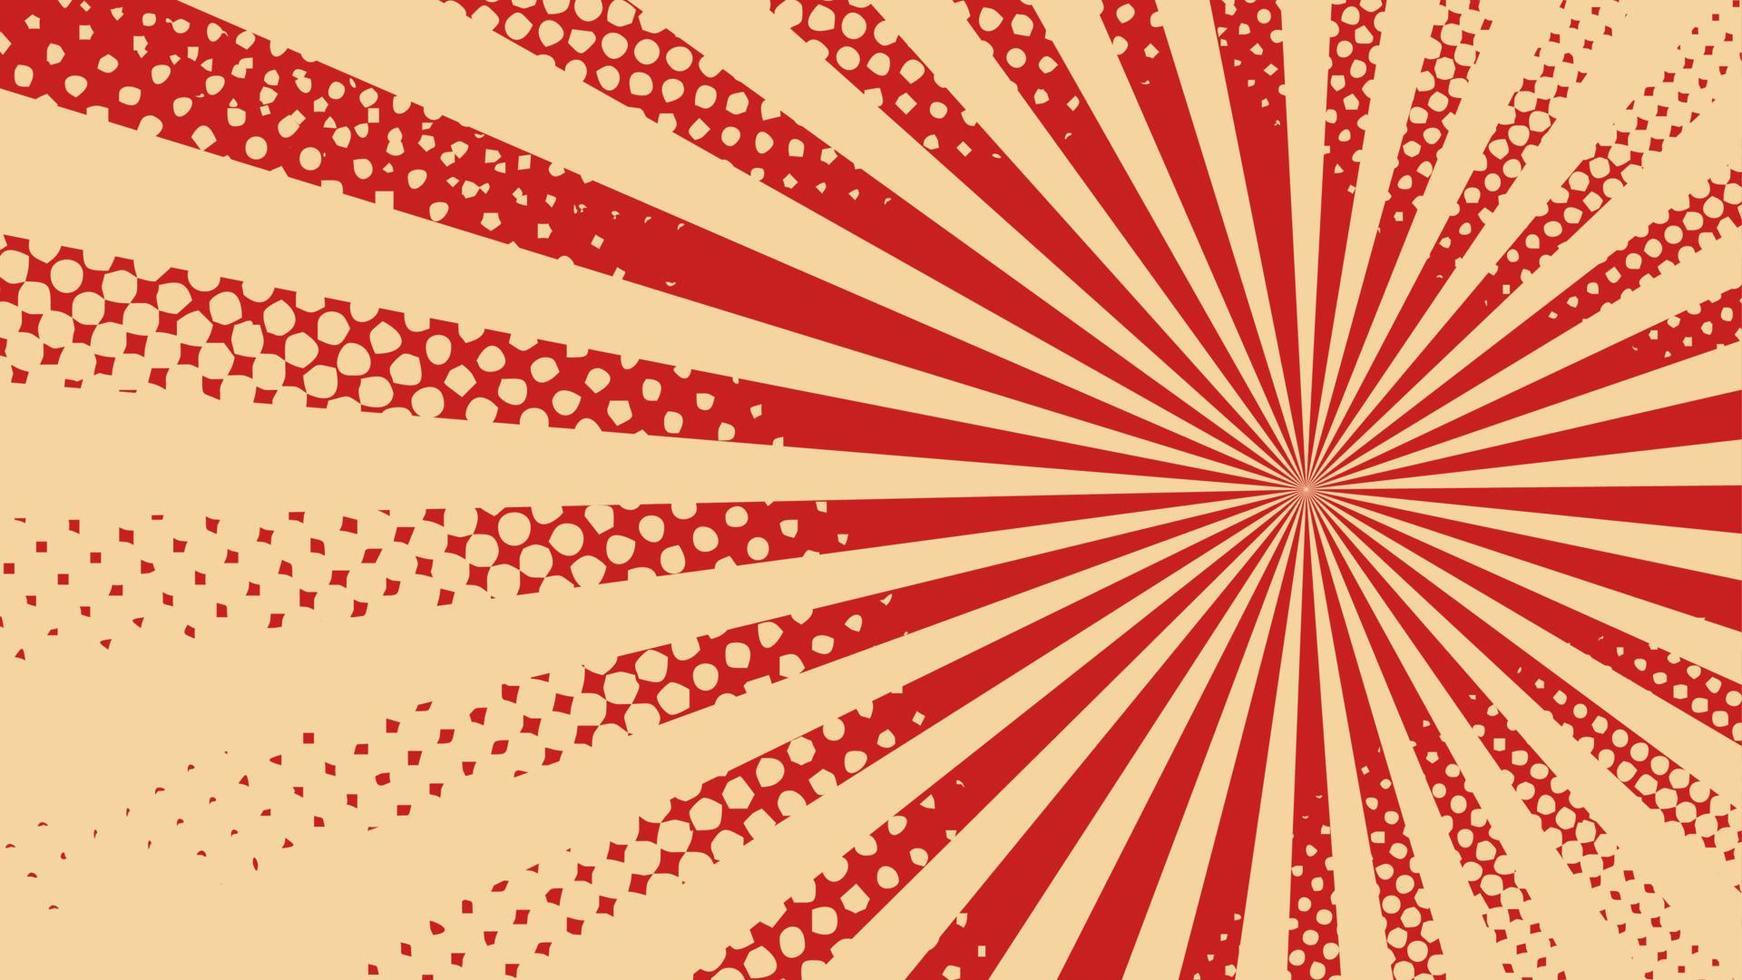 Comic background concept. Red and yellow background with comic strips and dots theme. vector